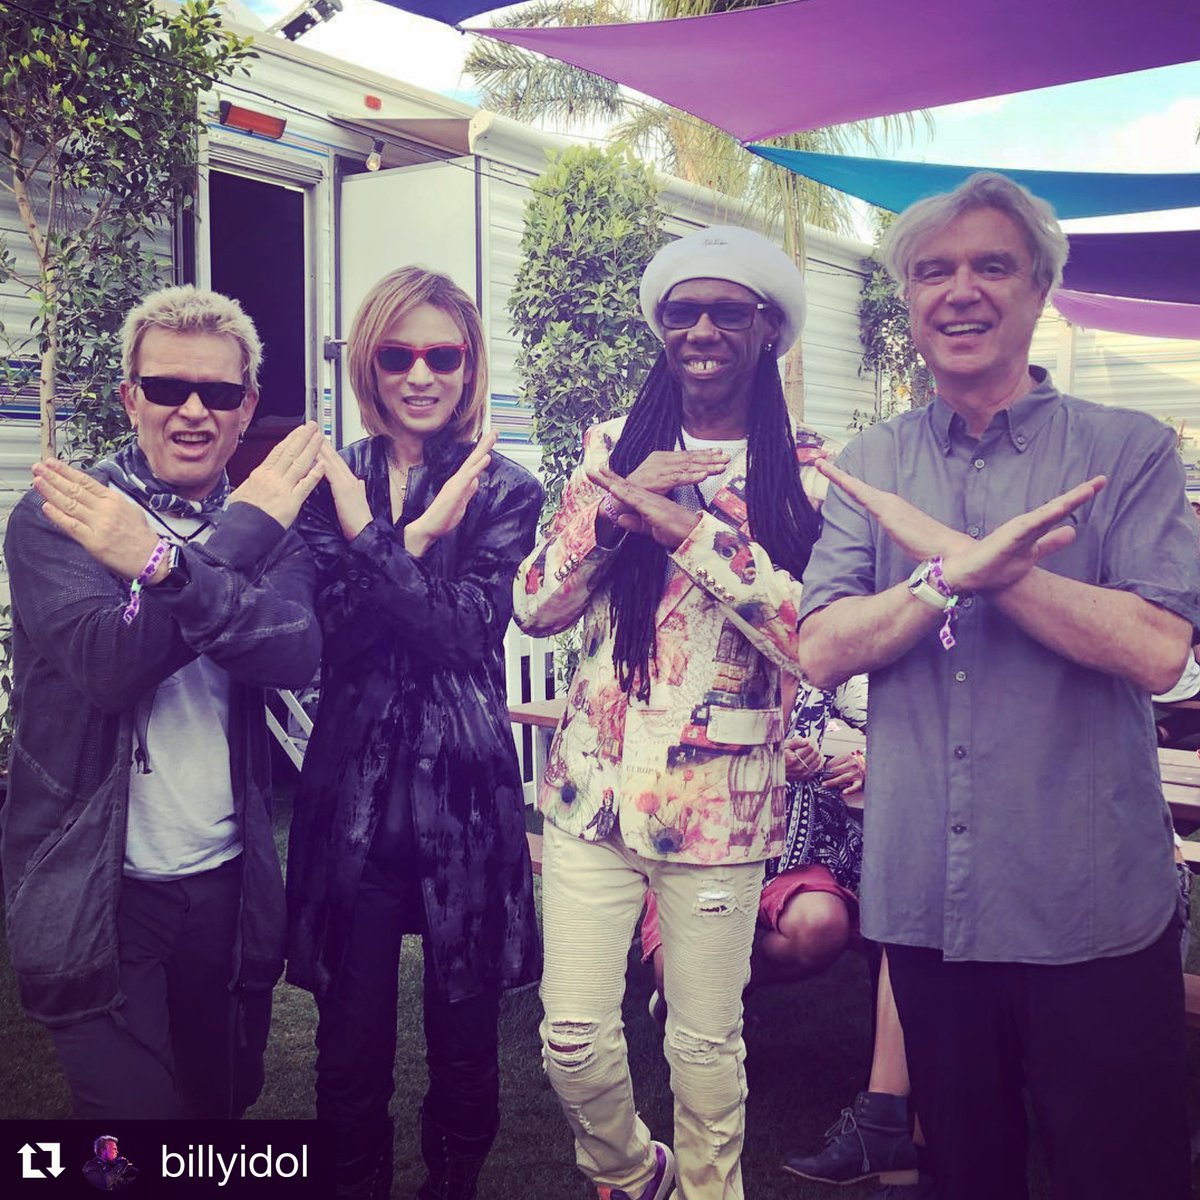 Nice hanging out with you at @coachella #backstage .!
＃コーチェラ の #バックステージで X ！
Repost:  #XMen @billyidol @xjapanofficial @yoshikiofficial @nilerodgers @DBtodomundo 
#coachella #billyidol #xjapan #yoshiki #nilerodgers #davidbyrne
instagram.com/p/BiIhvrTgDFv/…